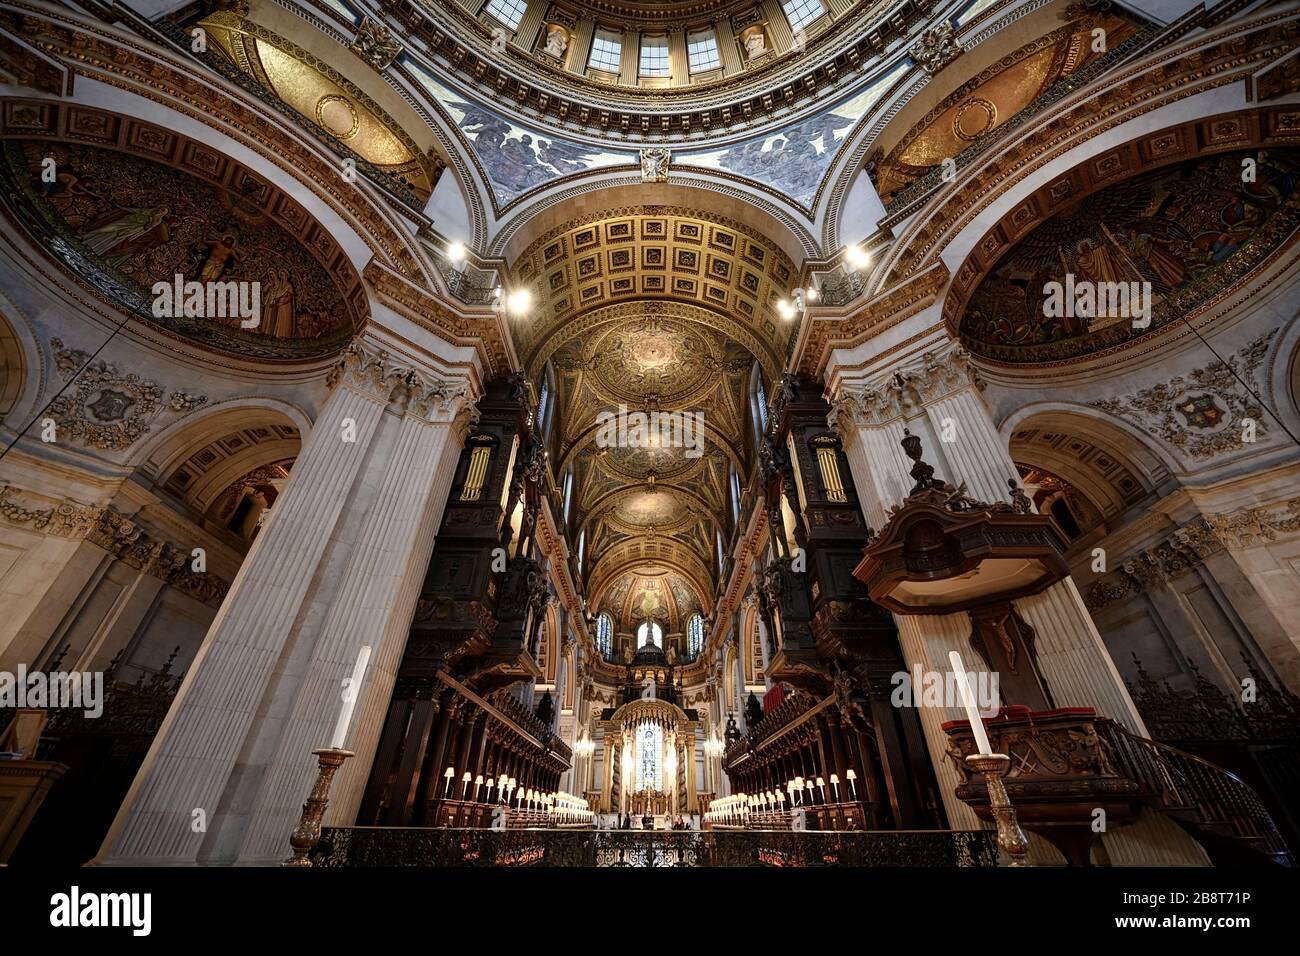 Interior architectural view of the Saint Pauls cathedral in London Stock Photo